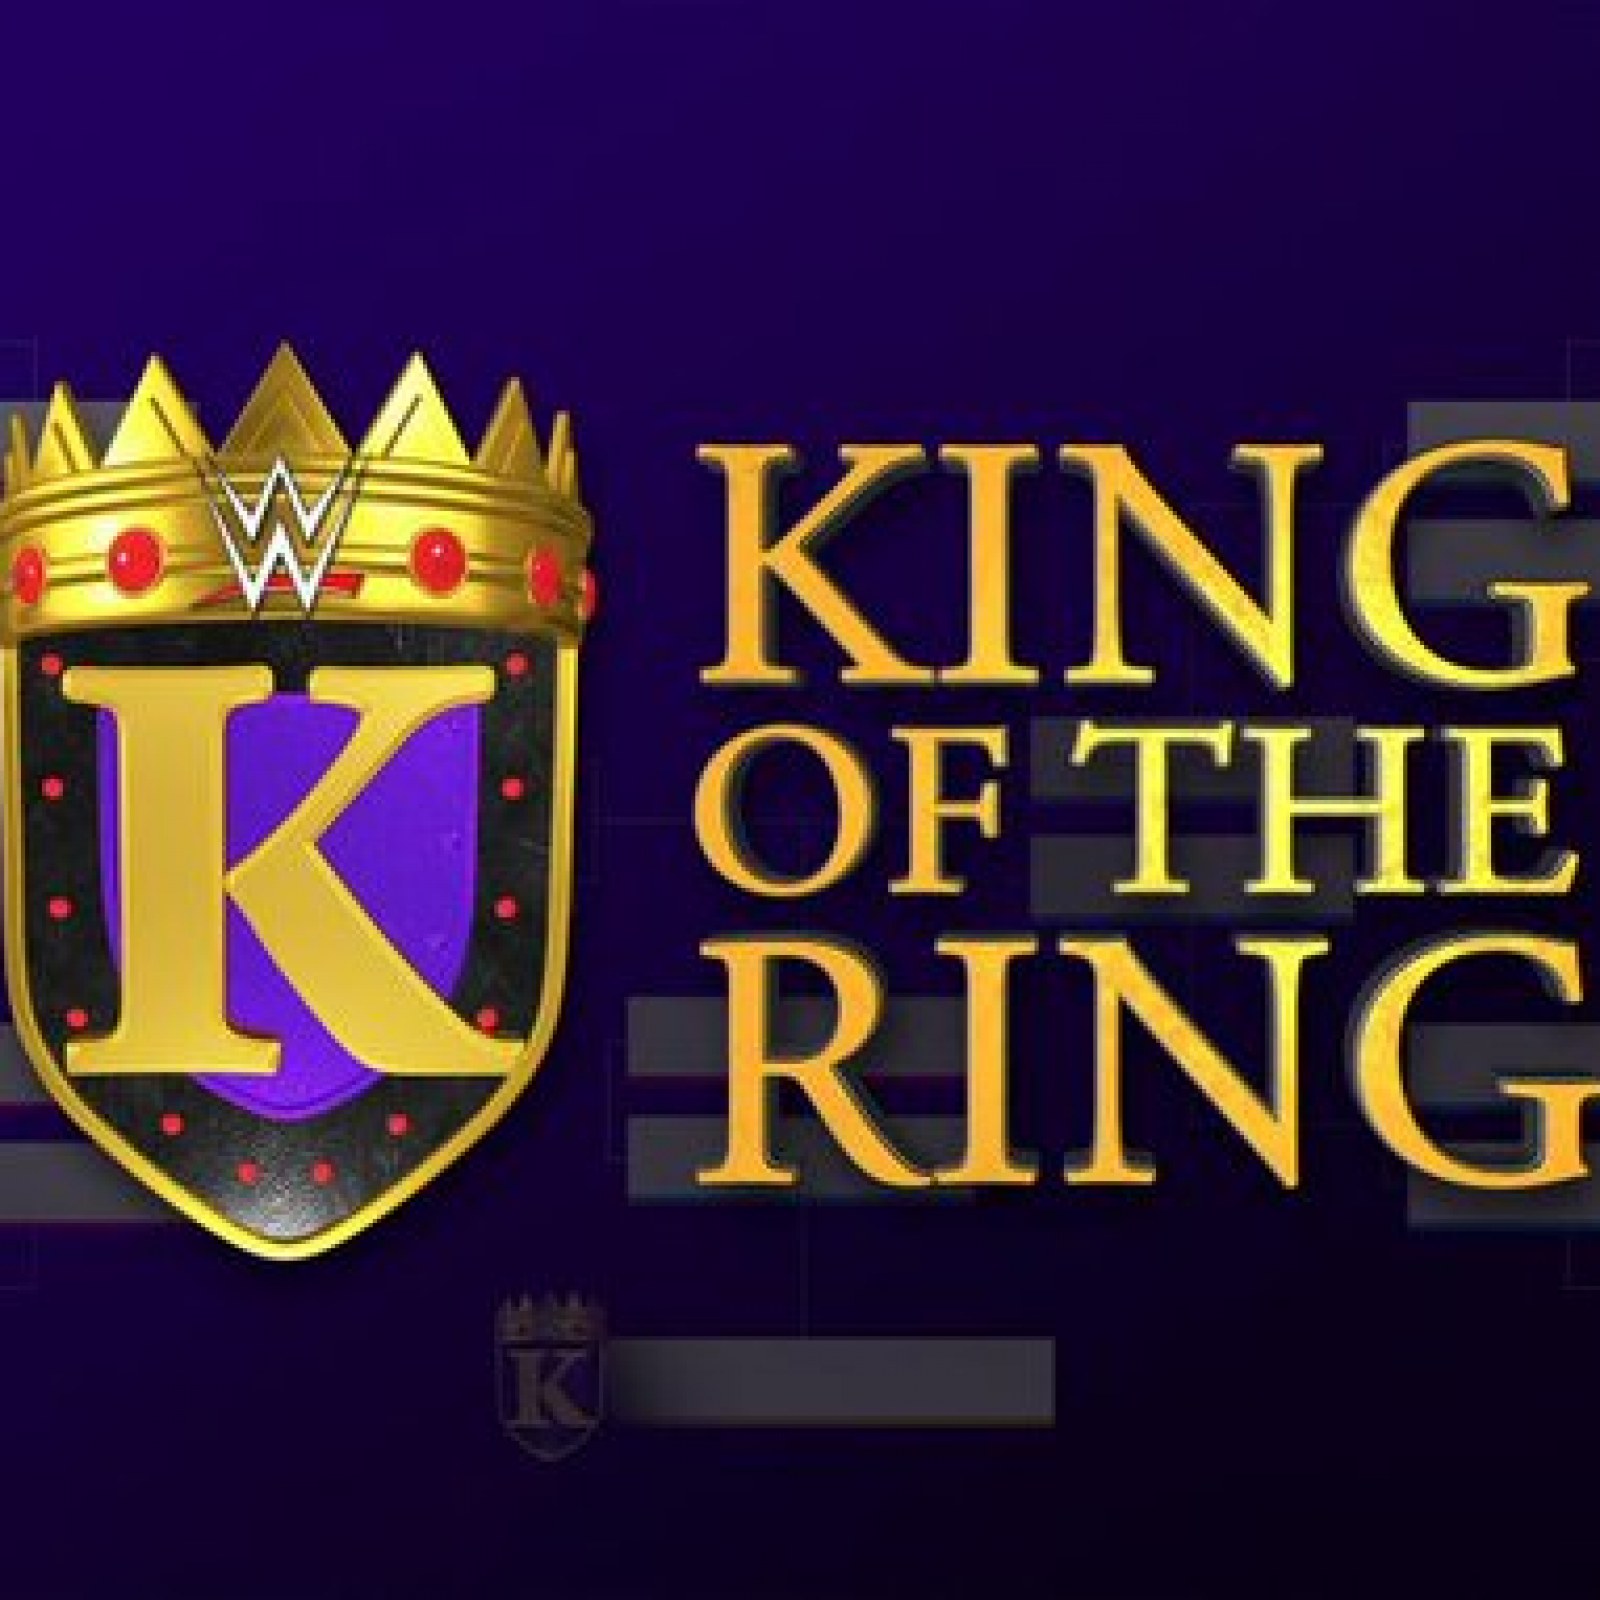 WWE king of the ring 2019